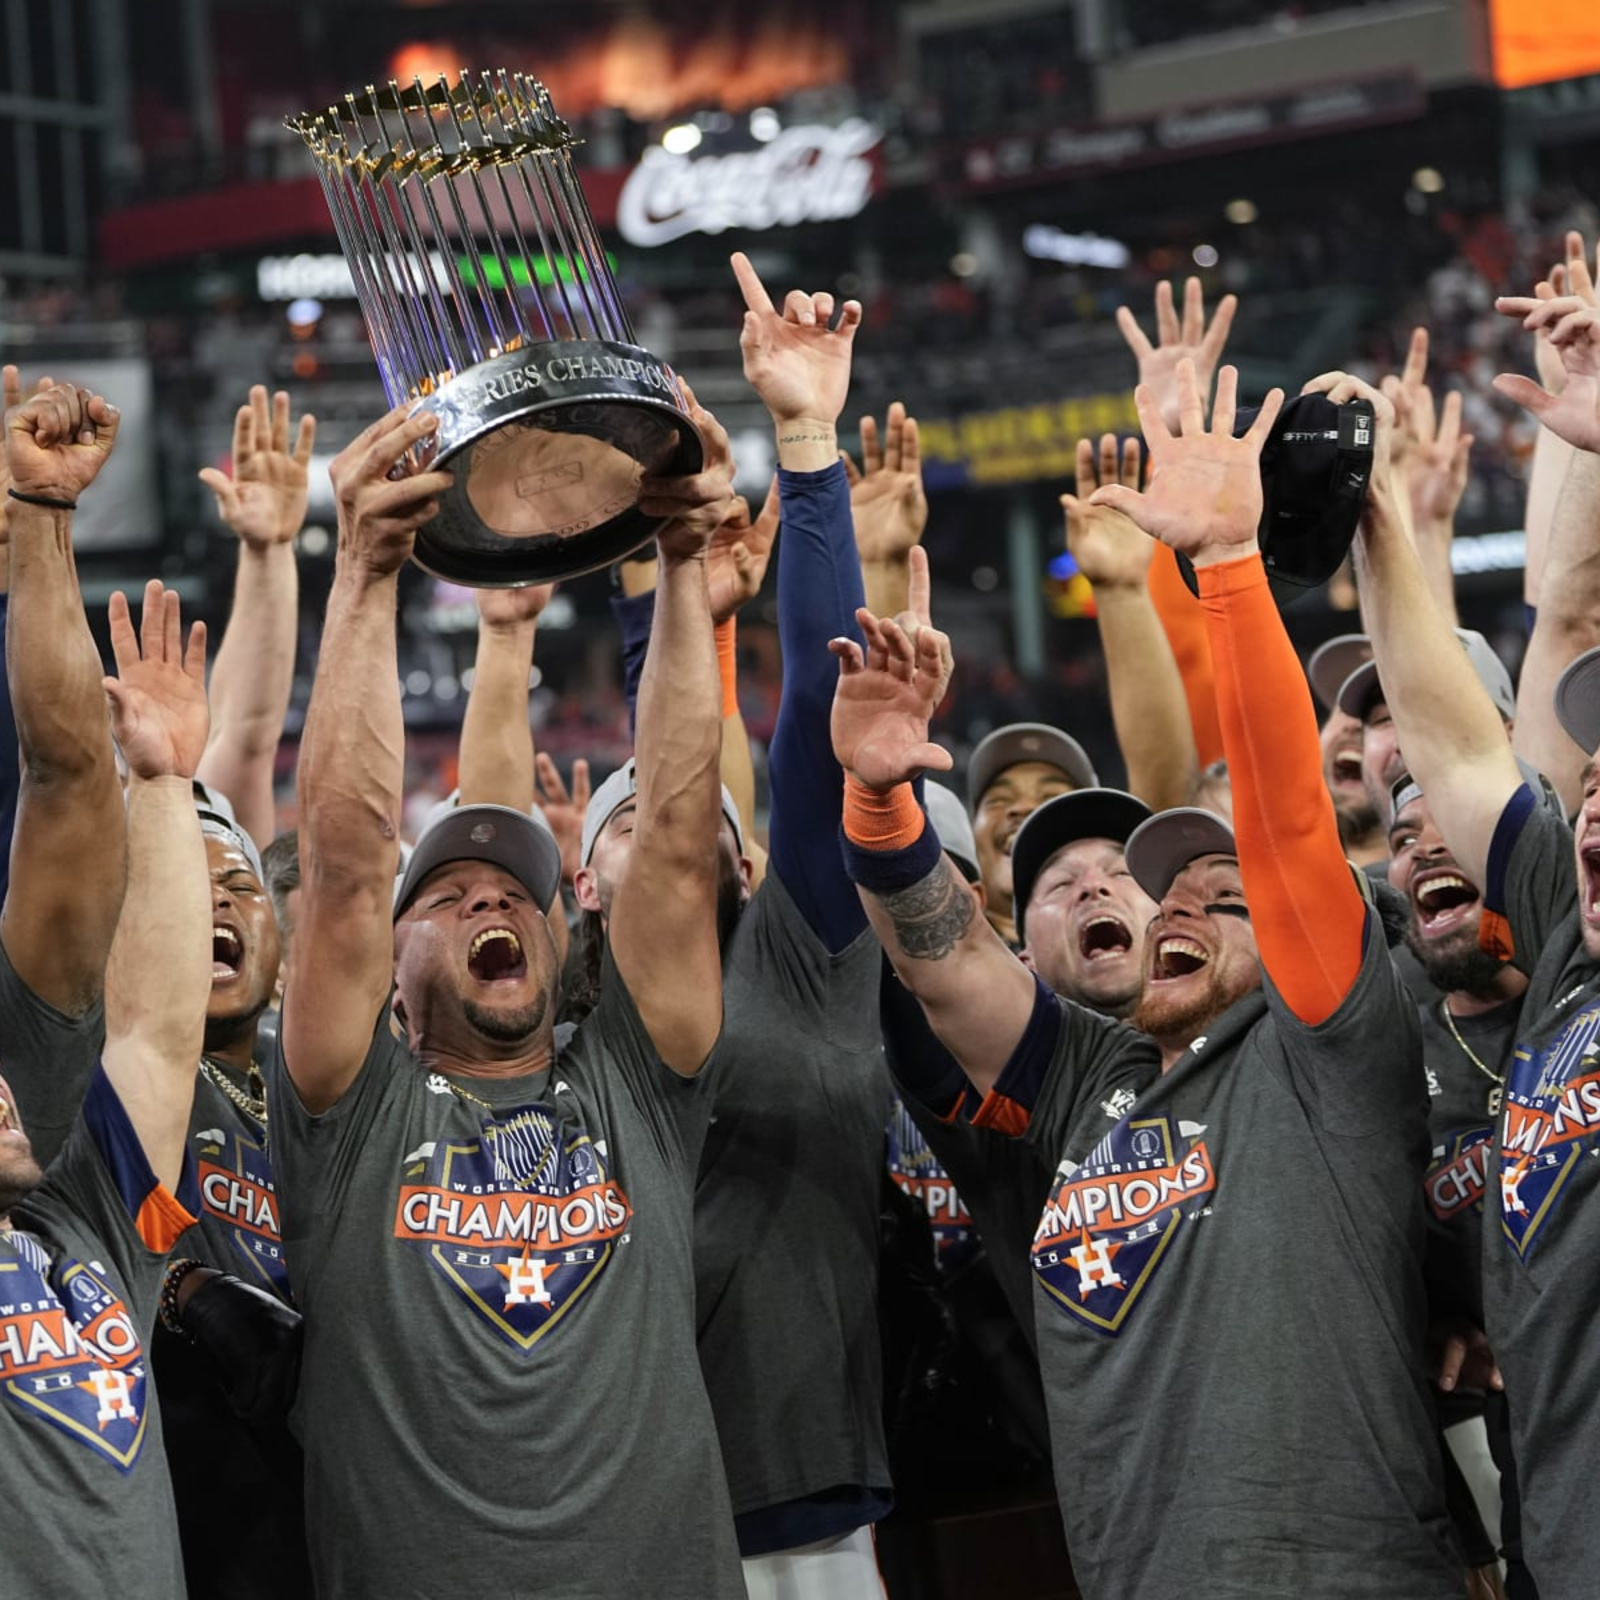 Astros parade: Live stream, how to watch online, time, date, route